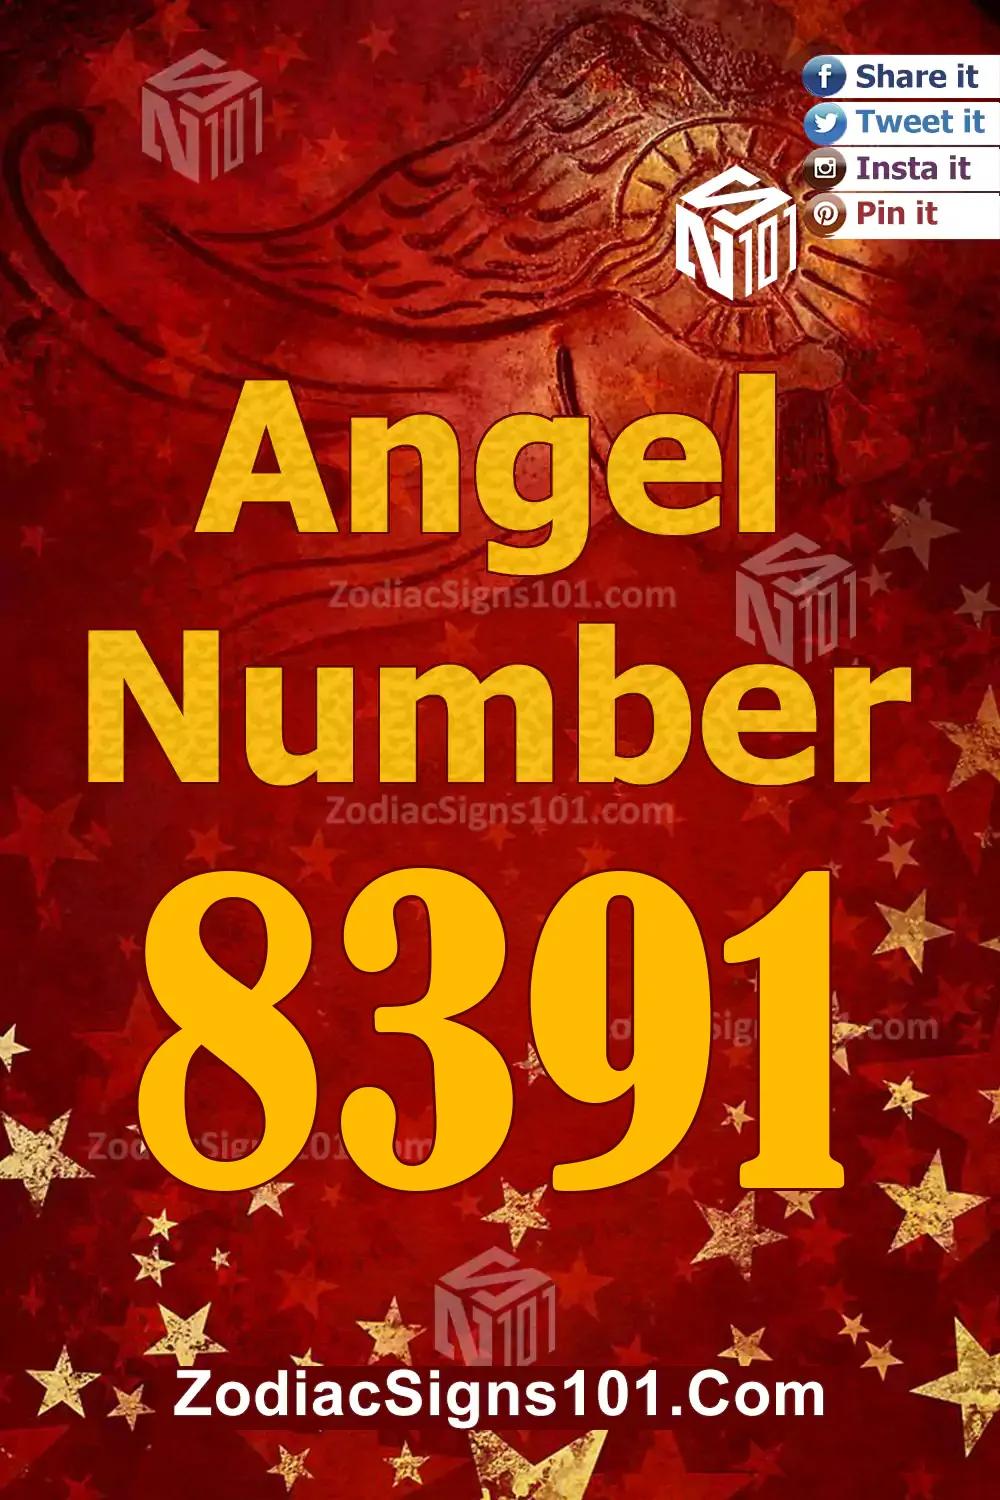 8391 Angel Number Meaning